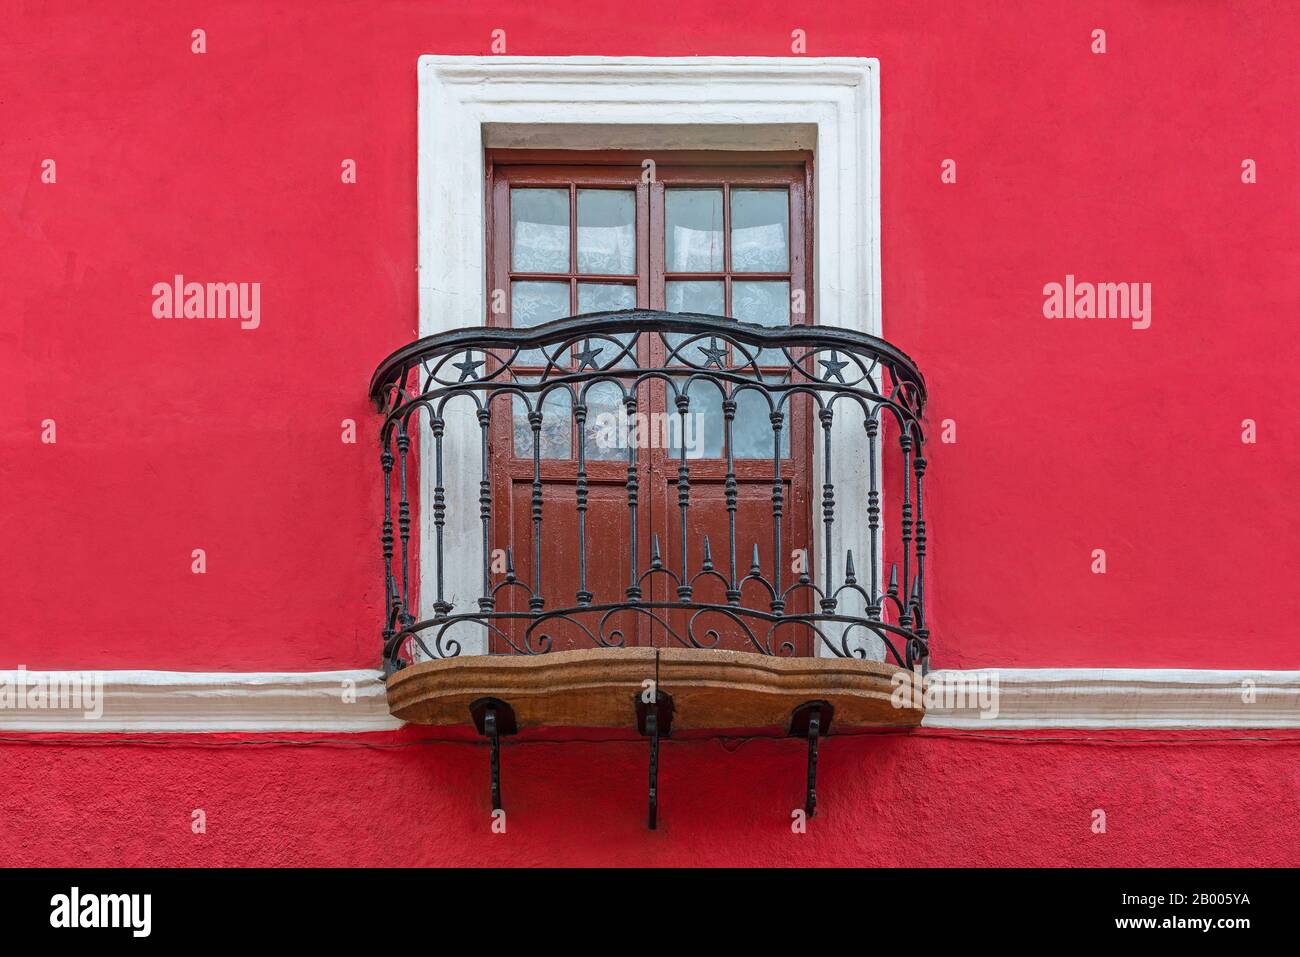 Colonial style balcony with wooden window, wrought iron decorations and red facade, Potosi, Bolivia. Stock Photo